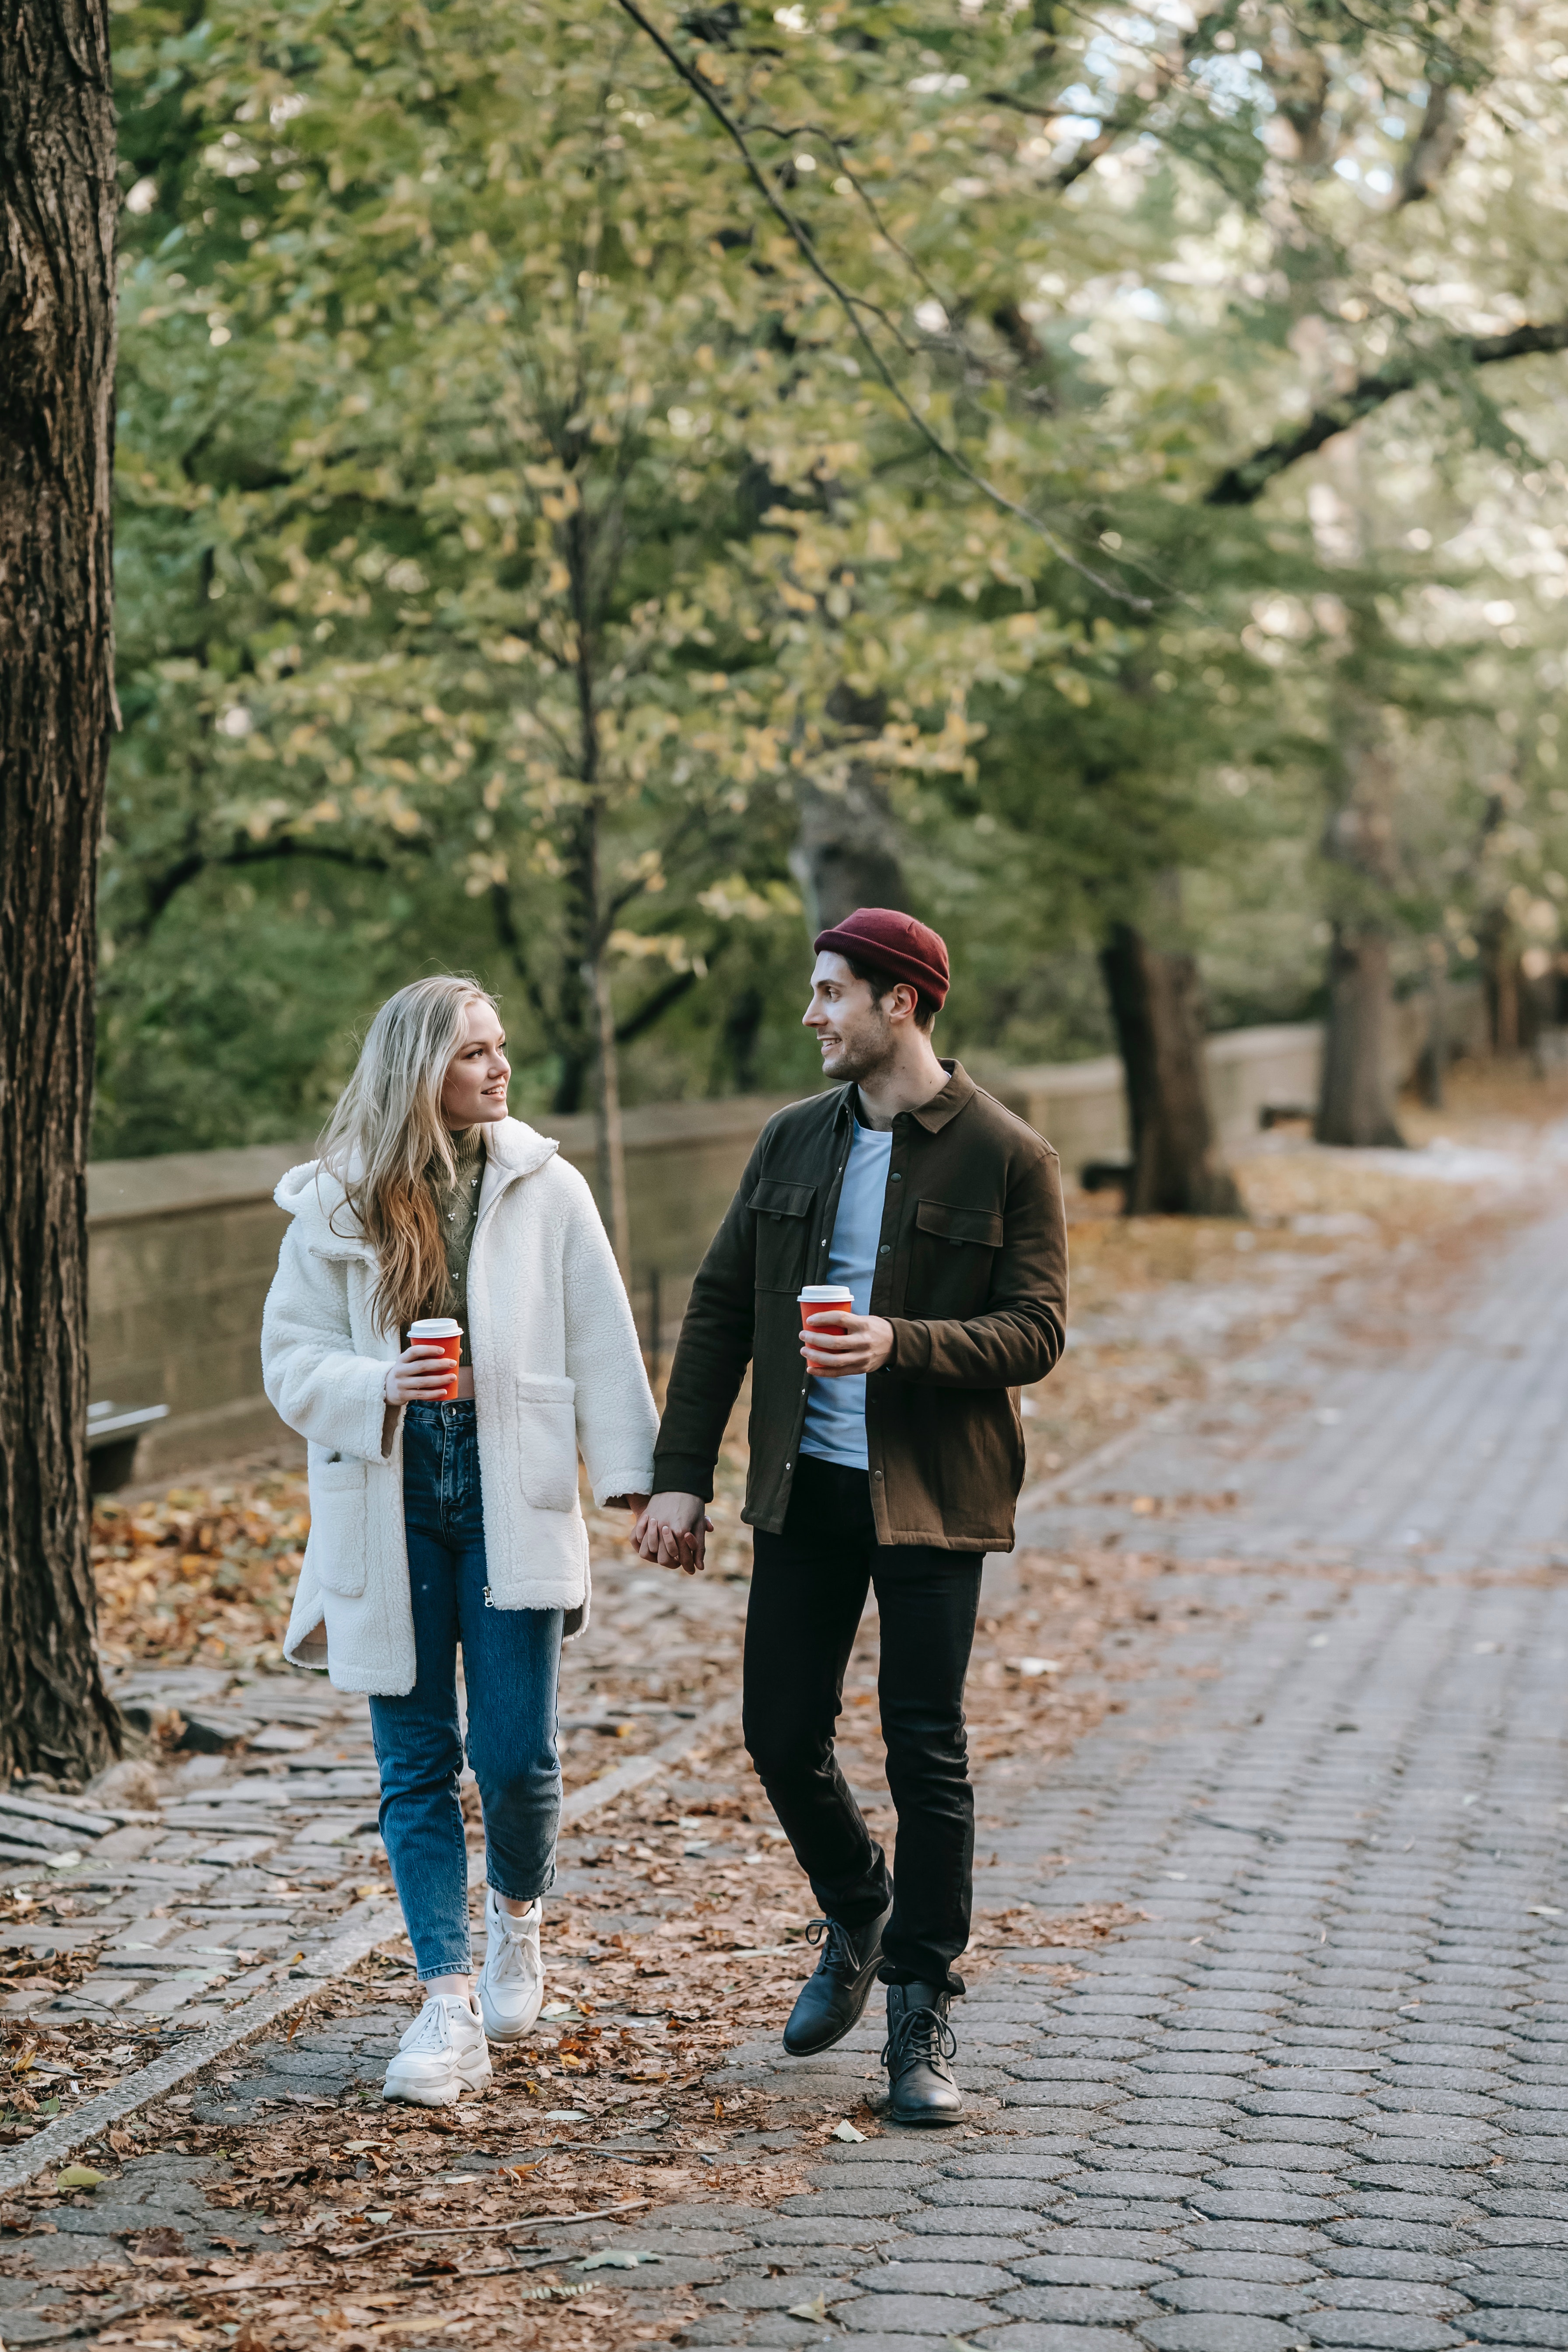 A couple walking and talking. | Source: Pexels